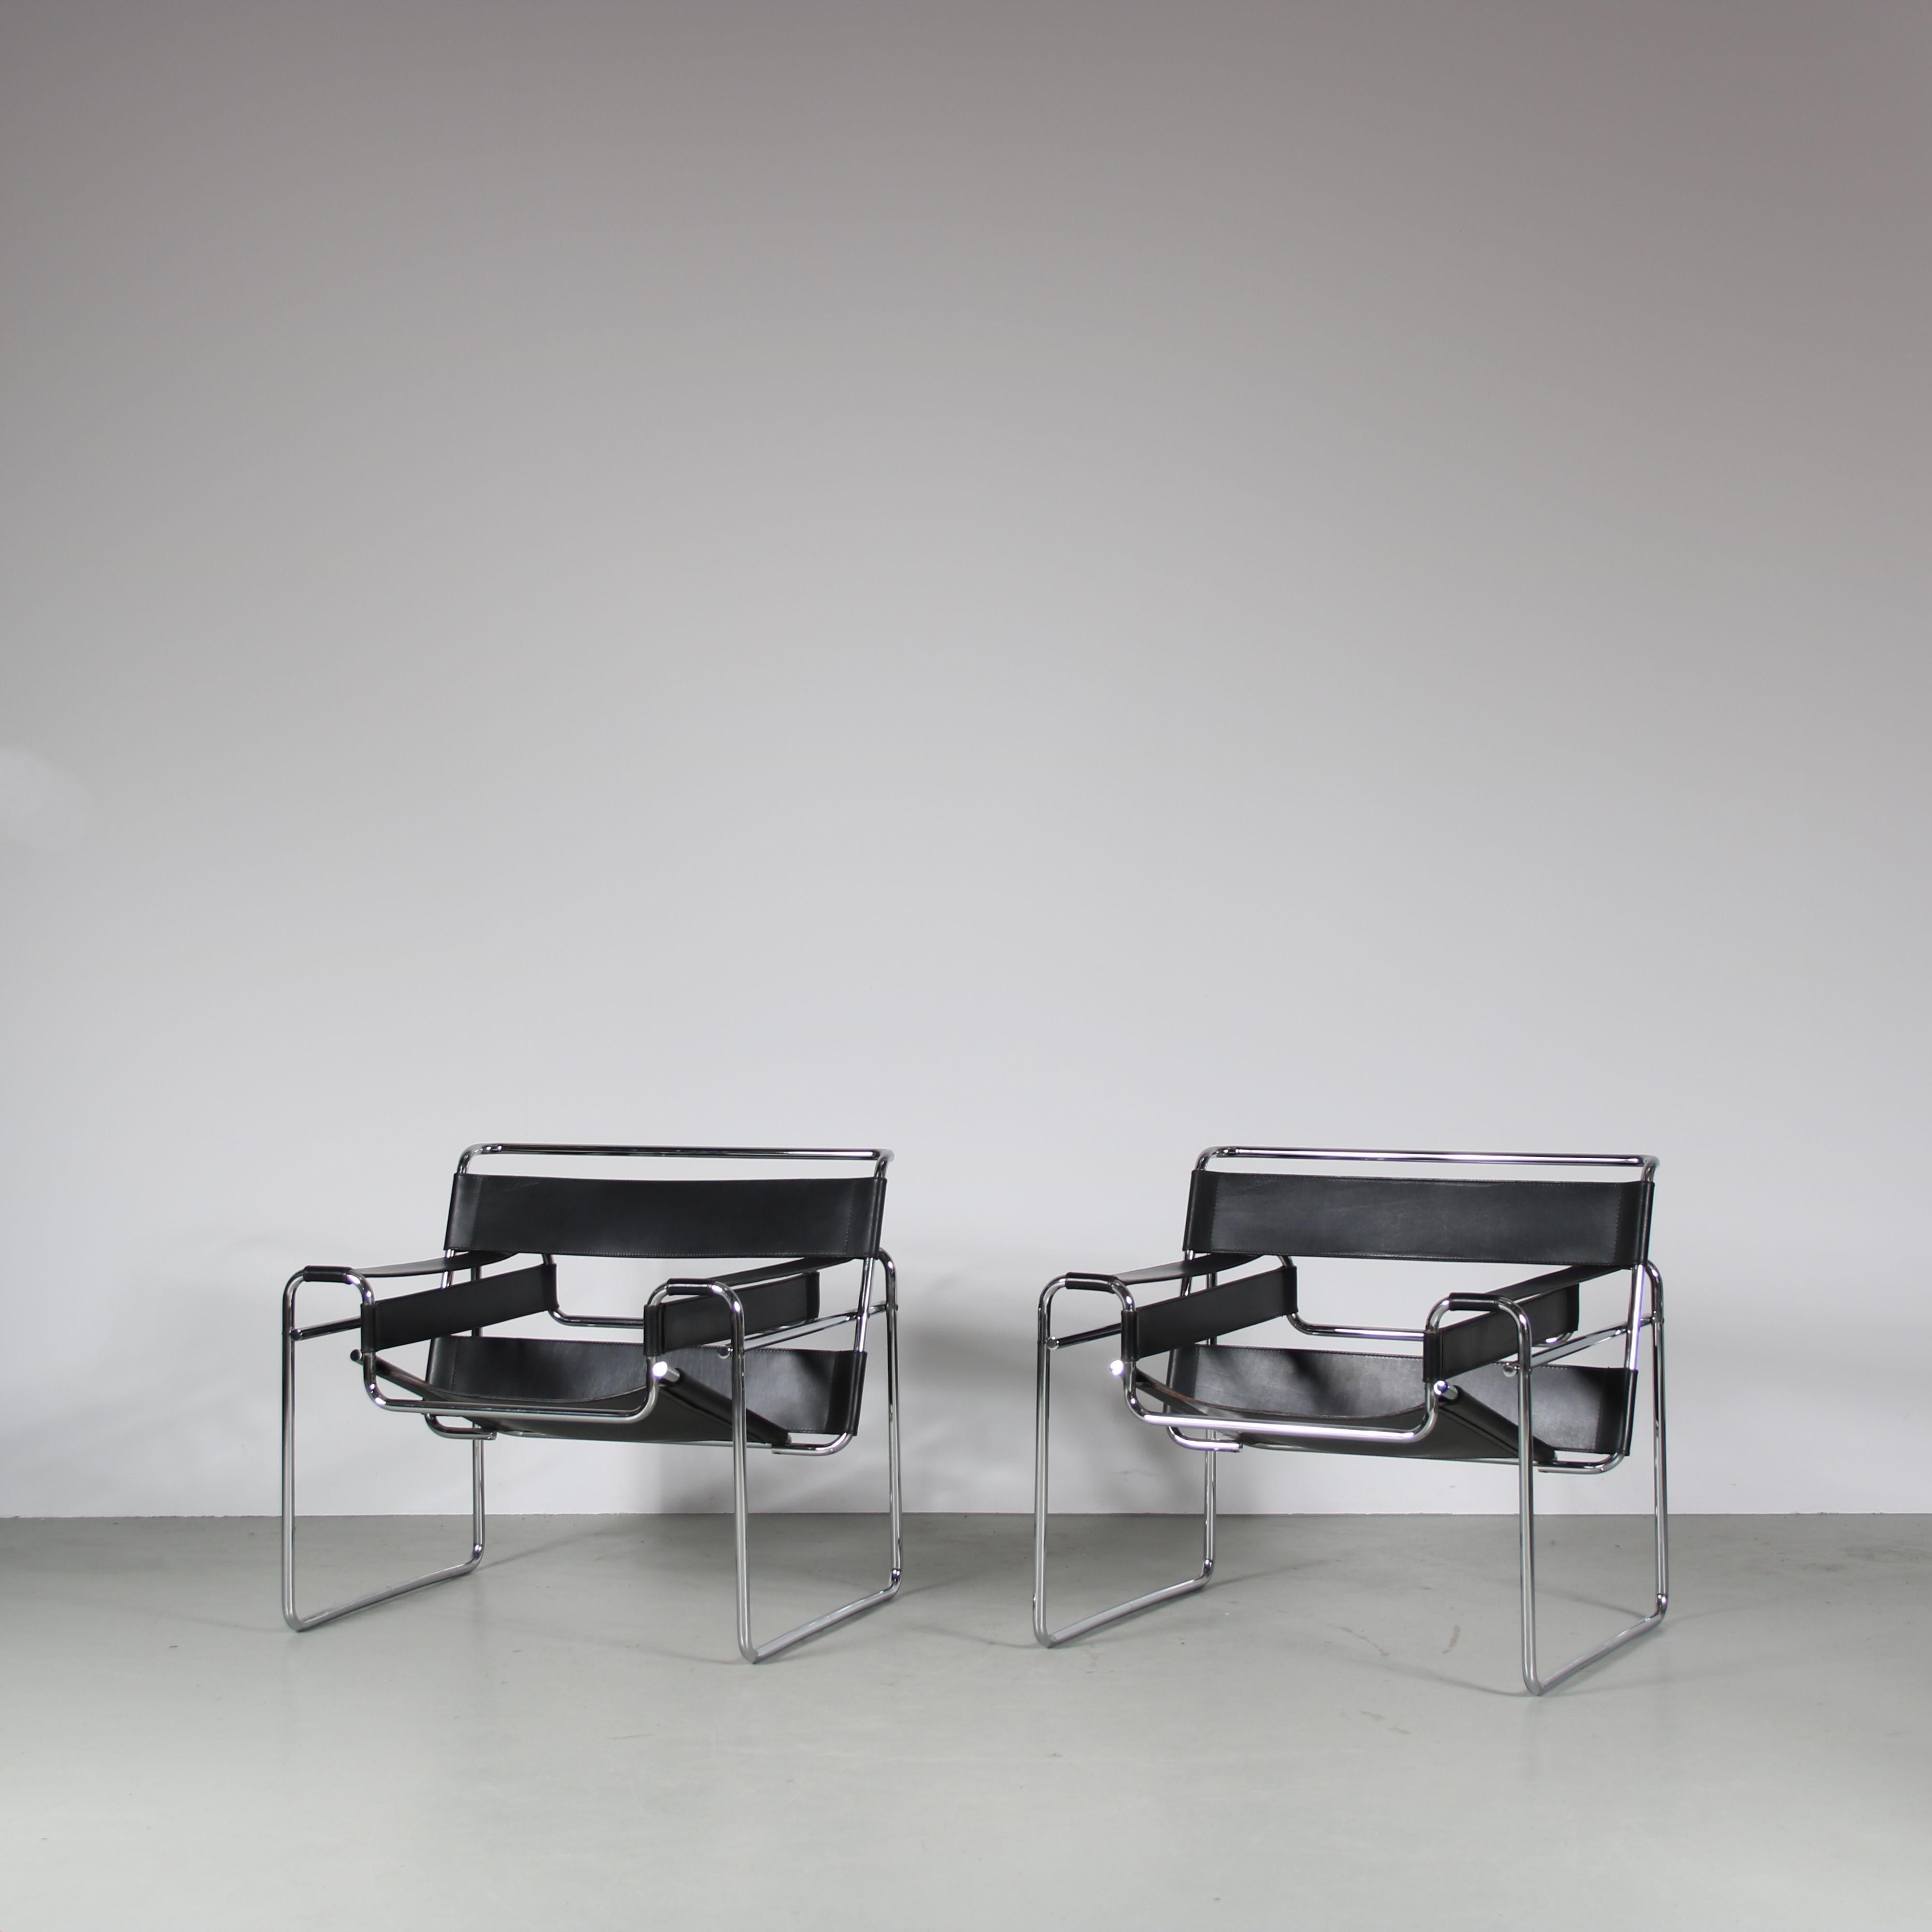 This elegant pair of “Wassily” chairs is a stunning representation of Marcel Breuer’s iconic modernist design. Originally designed in 1925-26, this particular pair was produced by Gavina in Italy during the 1960s. The chairs feature a sleek,